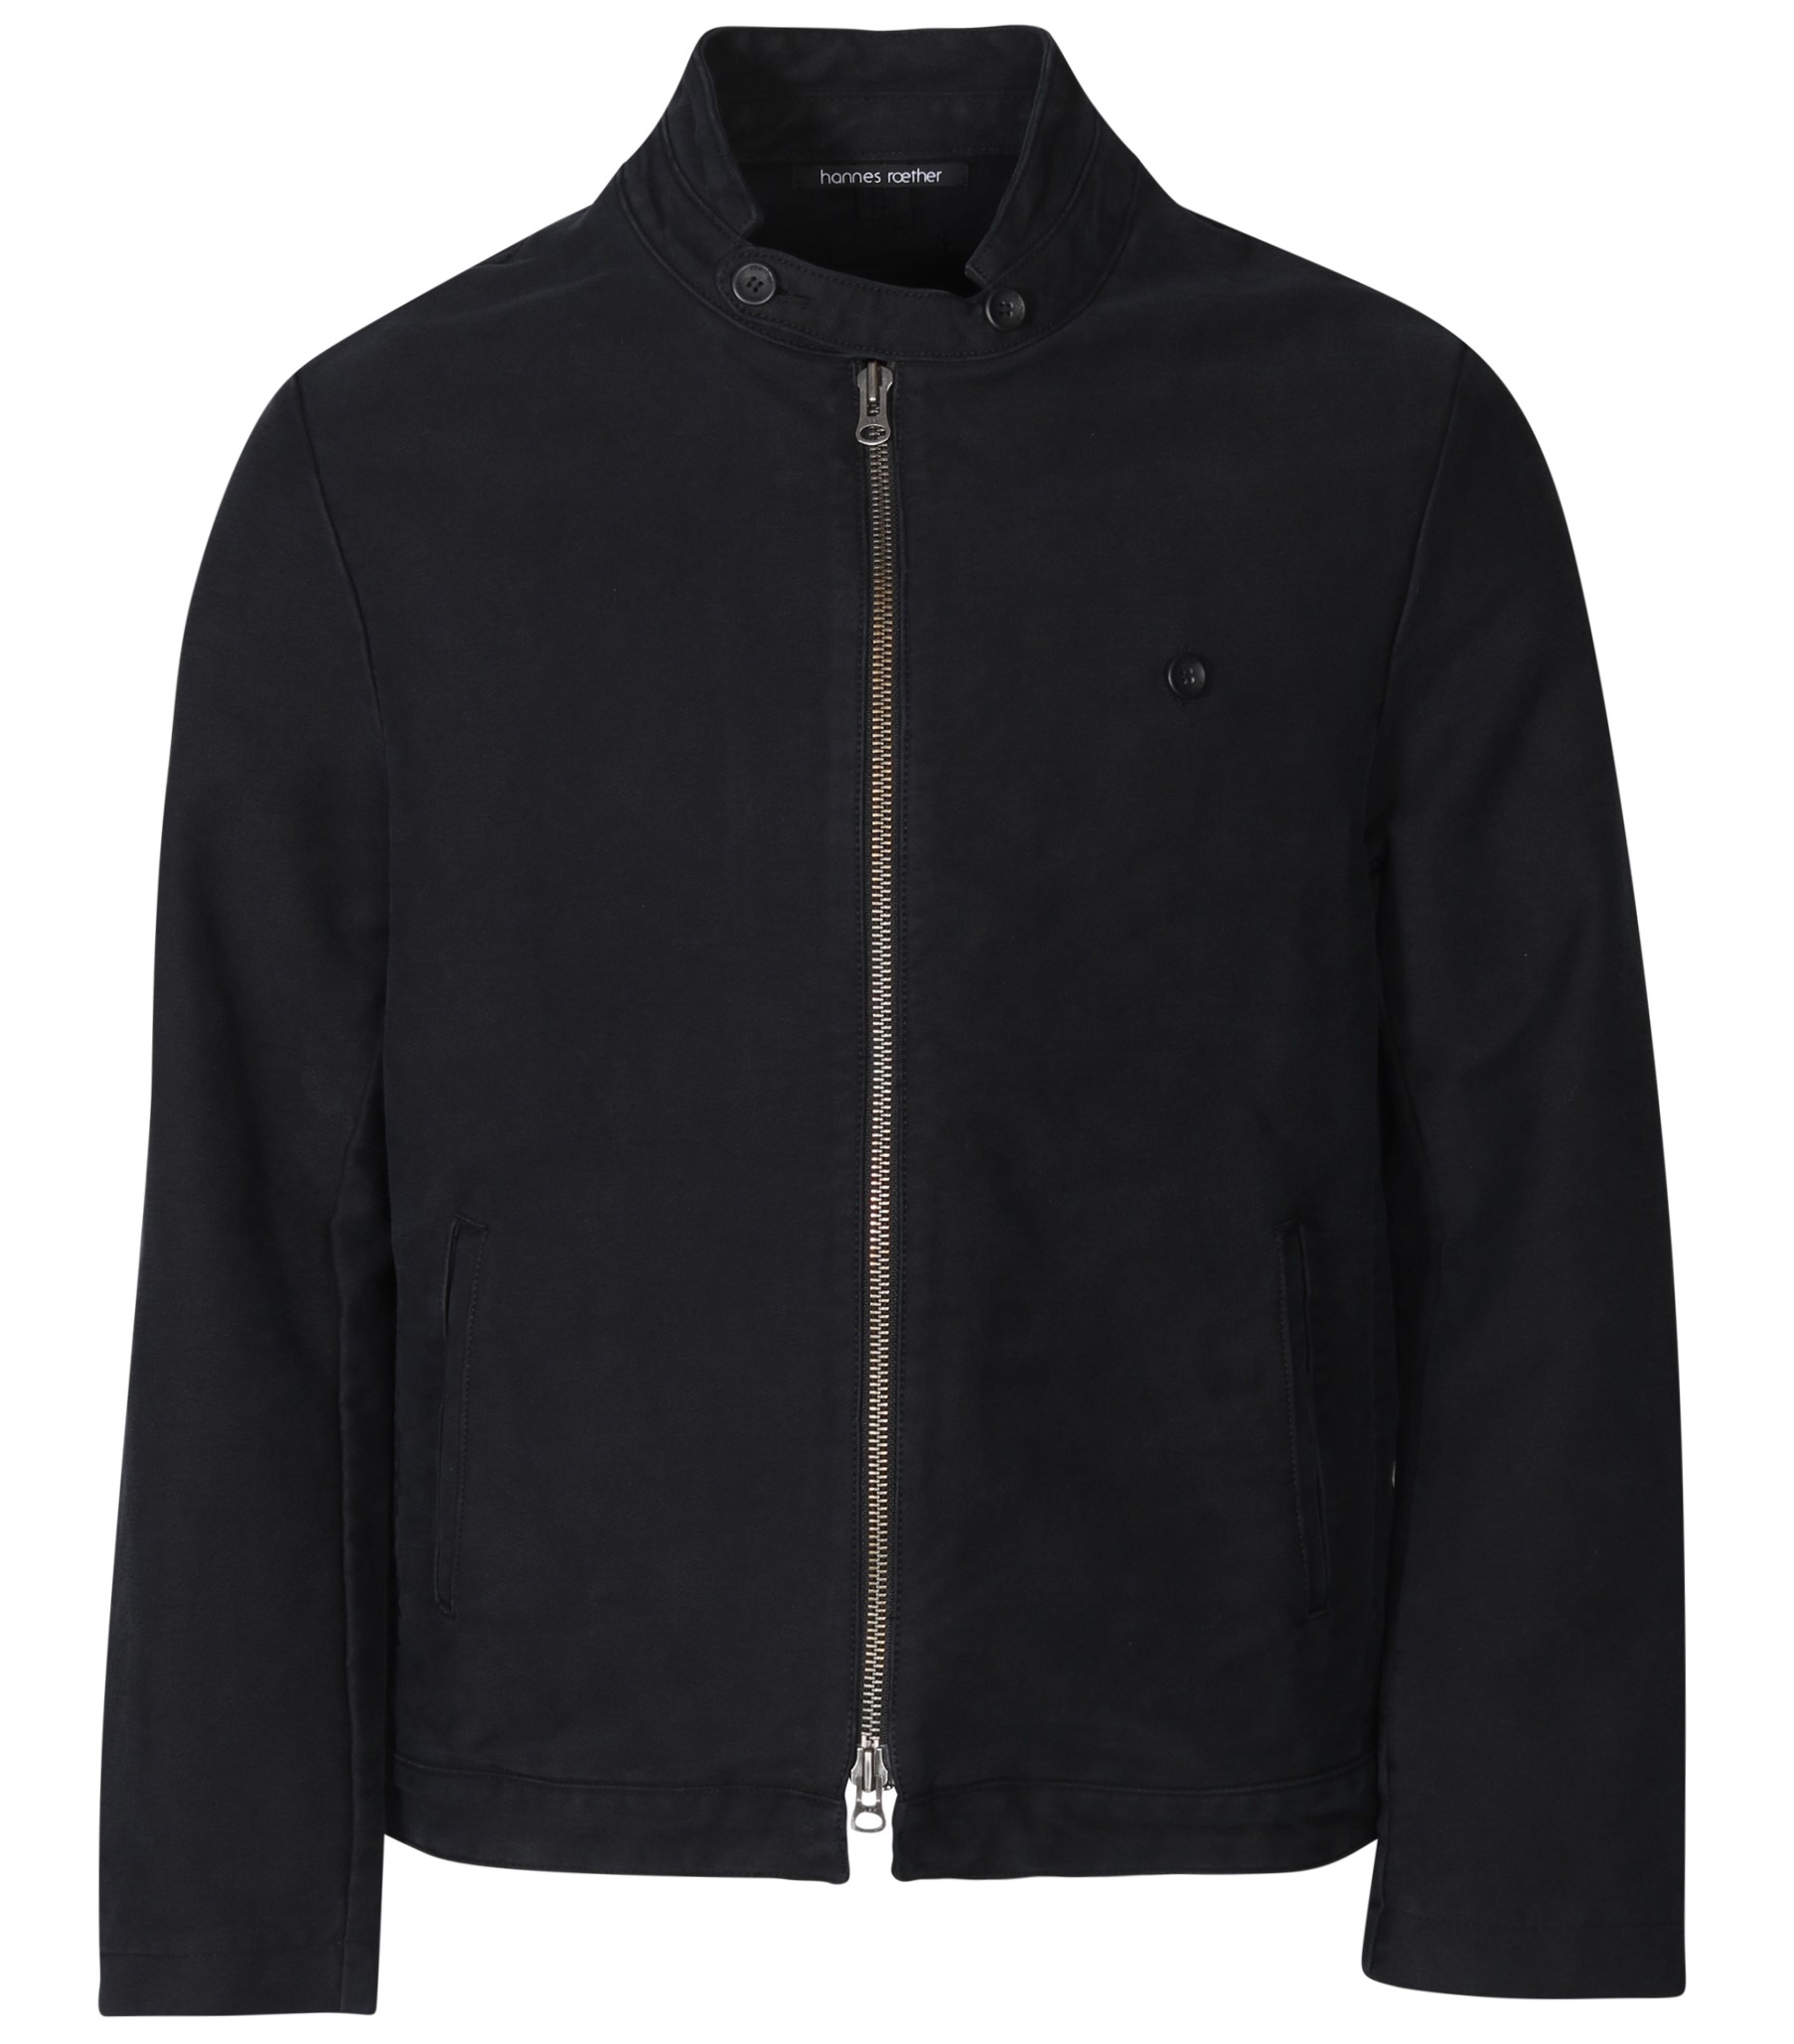 HANNES ROETHER Jacket in Washed Black